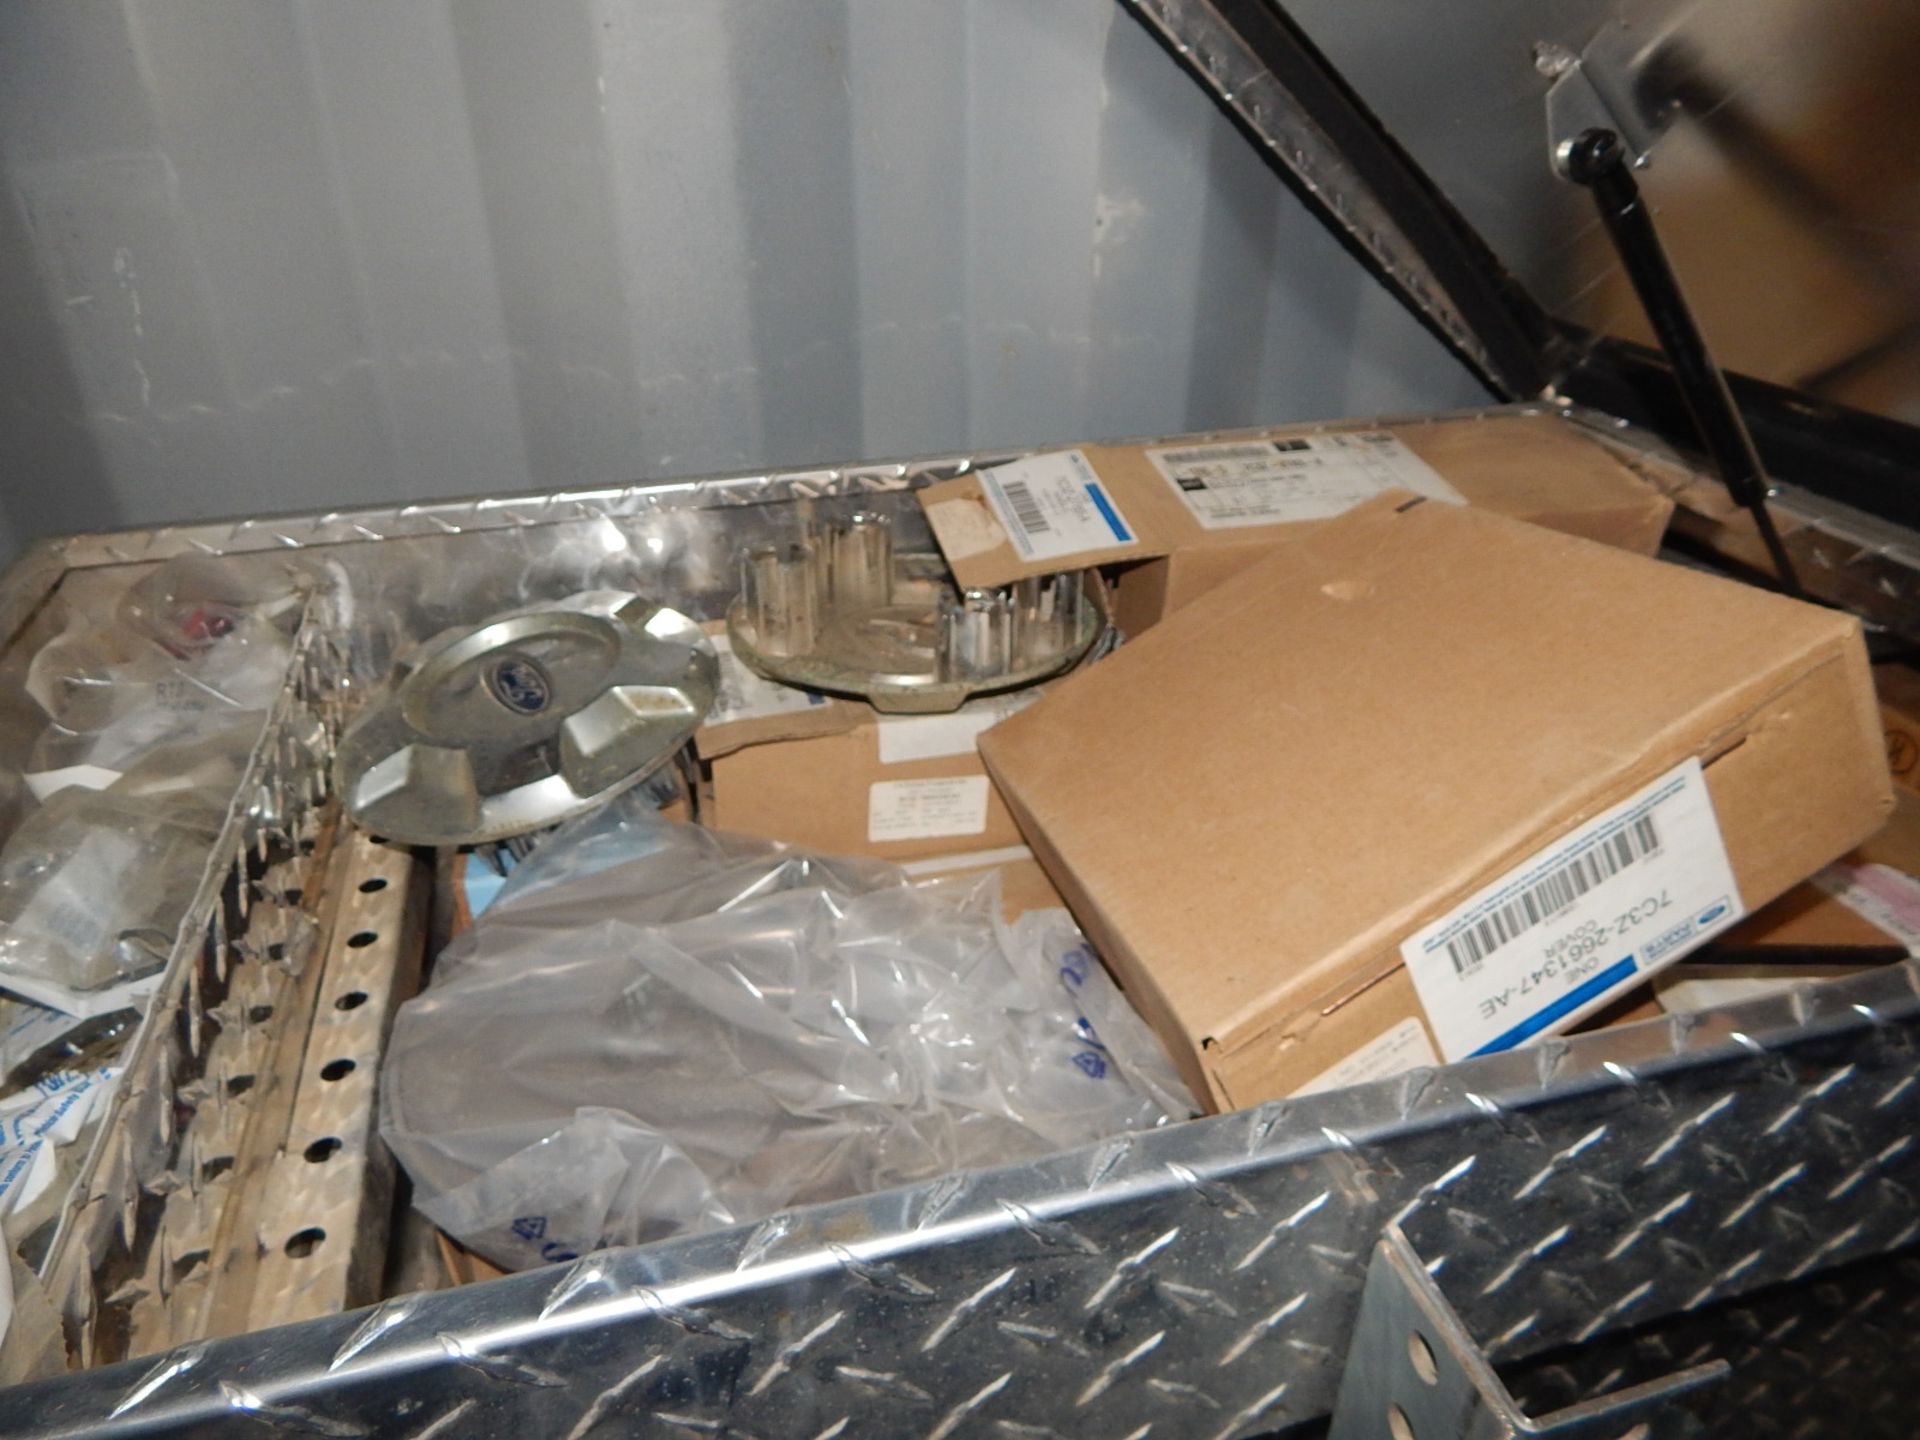 LOT/ TRUCK TOOLBOX WITH CONTENTS CONSISTING OF FORD PARTS (SC 232) - Image 3 of 3